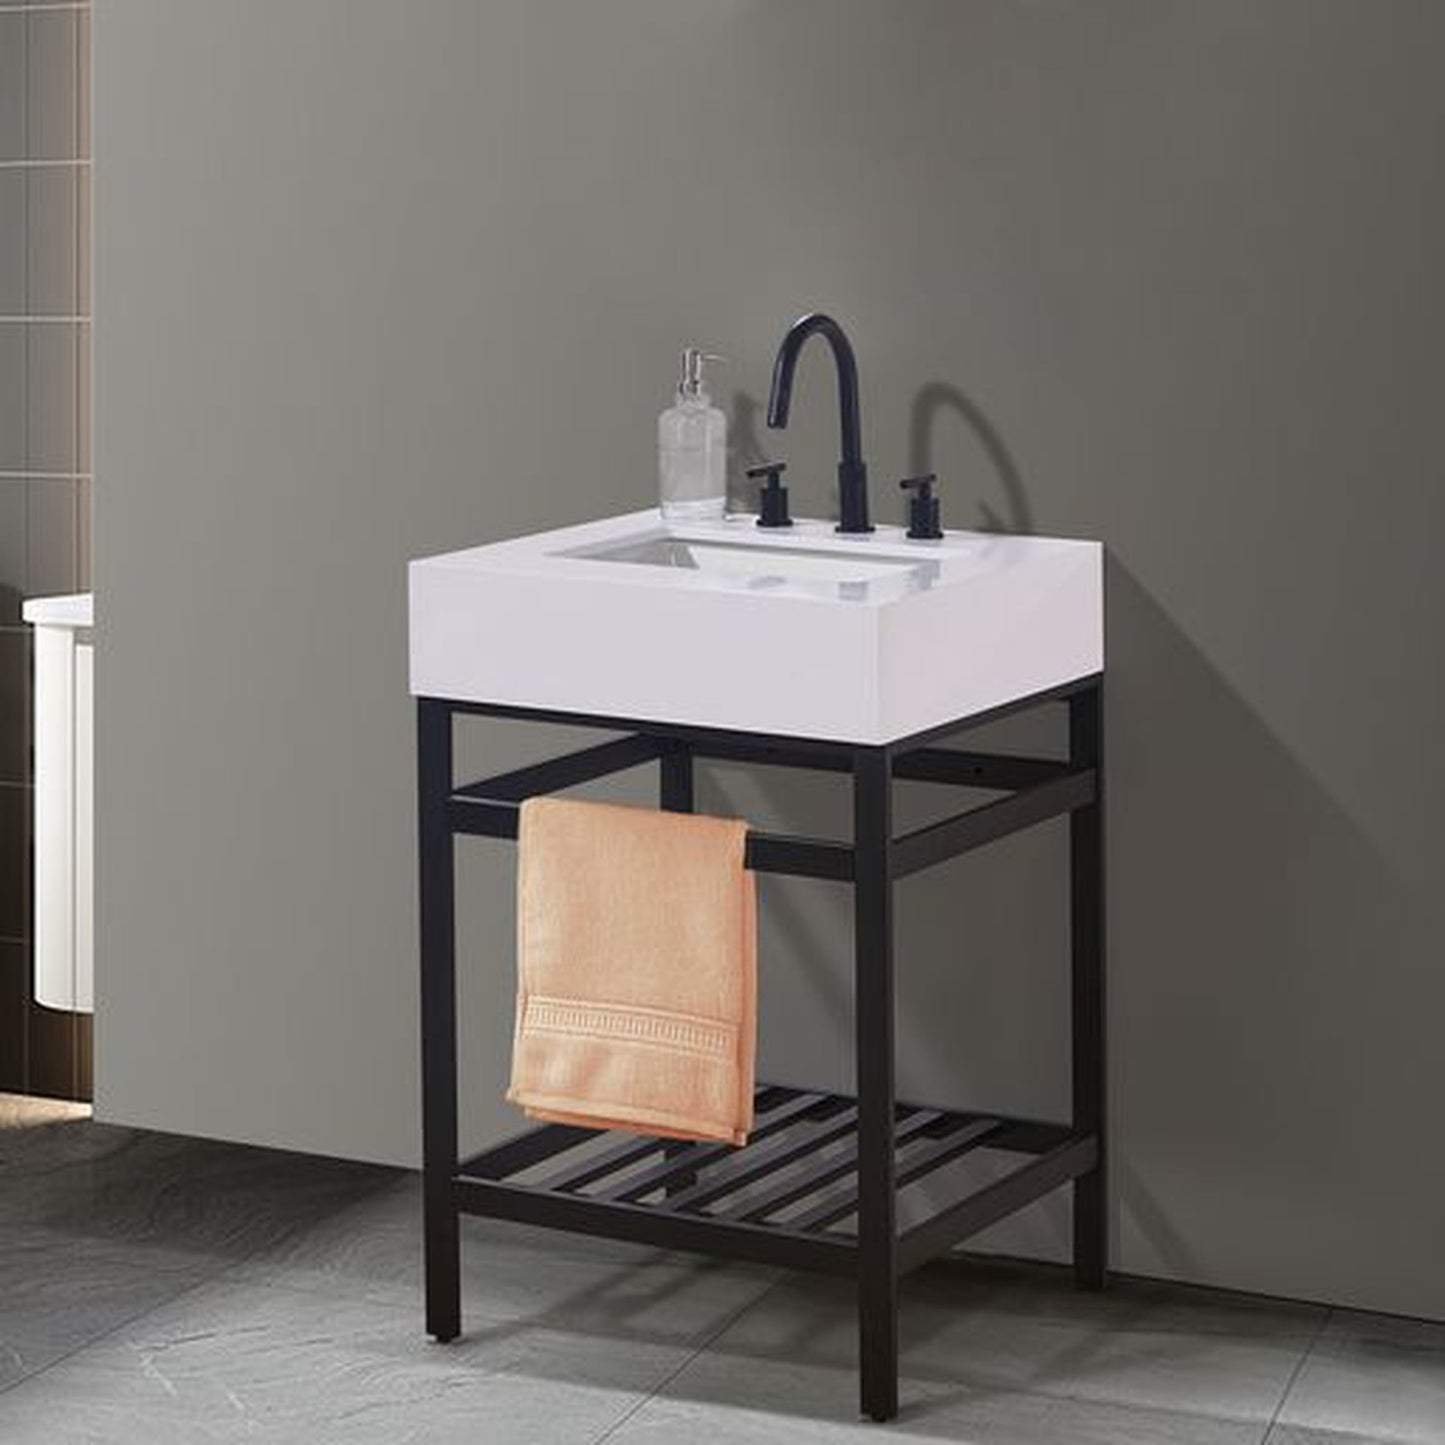 Altair Edolo 24" Matte Black Single Stainless Steel Bathroom Vanity Set Console With Snow White Stone Top, Single Rectangular Undermount Ceramic Sink, and Safety Overflow Hole